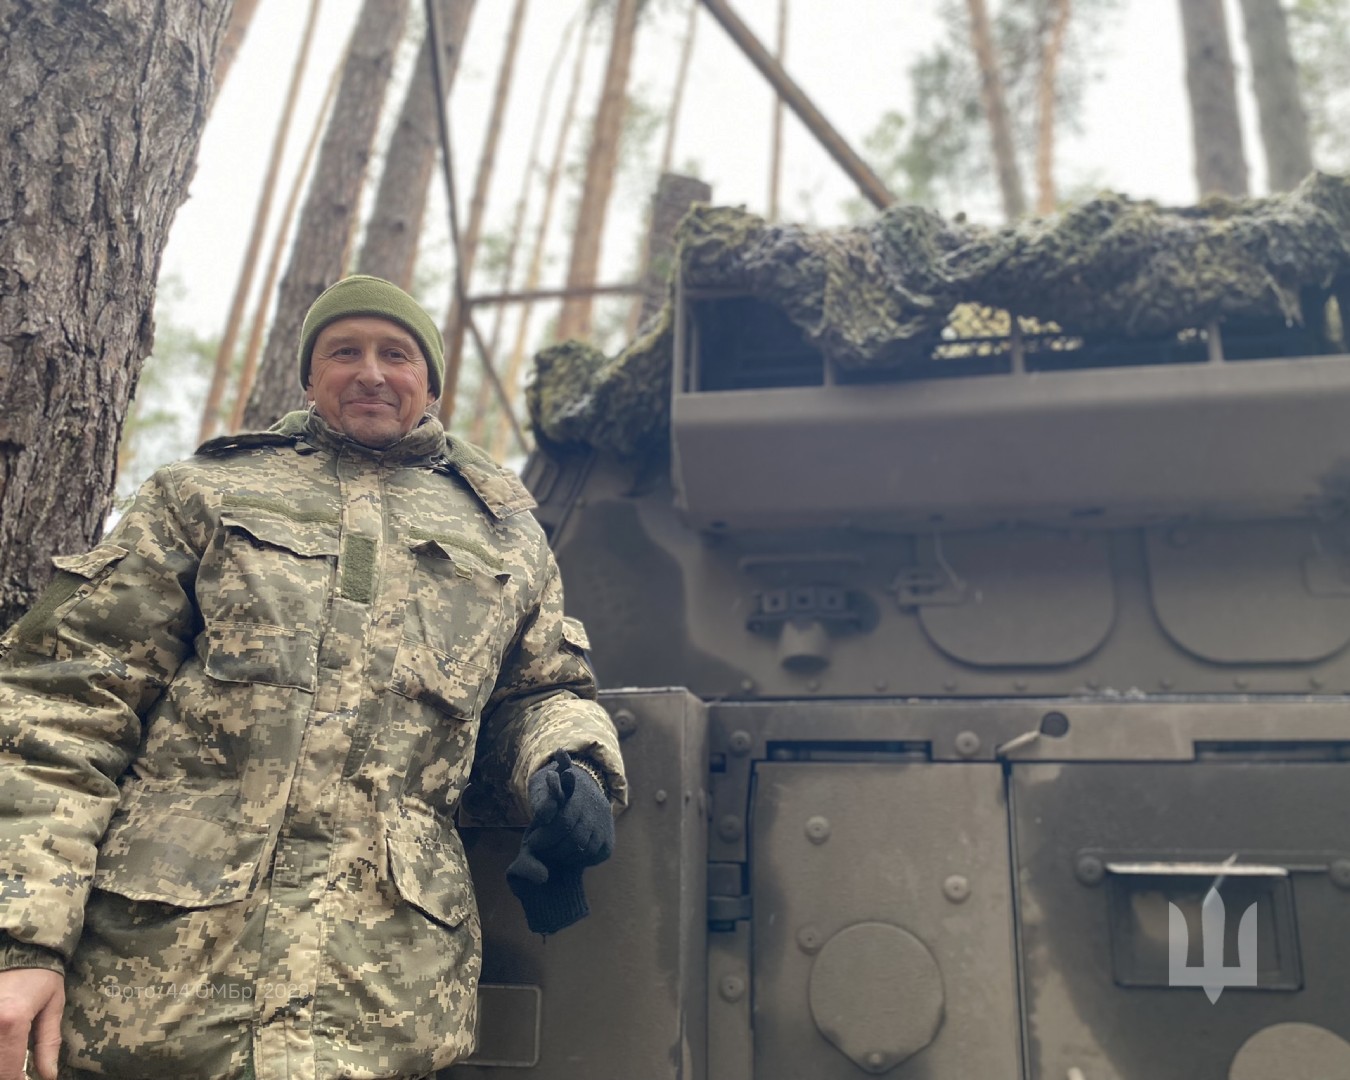 The Armed Forces of Ukraine Presented New Weapon System Received From Poland For the First Time On Video, 20-mm Rak self-propelled mortar in raw of the Armed Forces of UkraineProduction of tanks at Uralvagonzavod, Defense Express